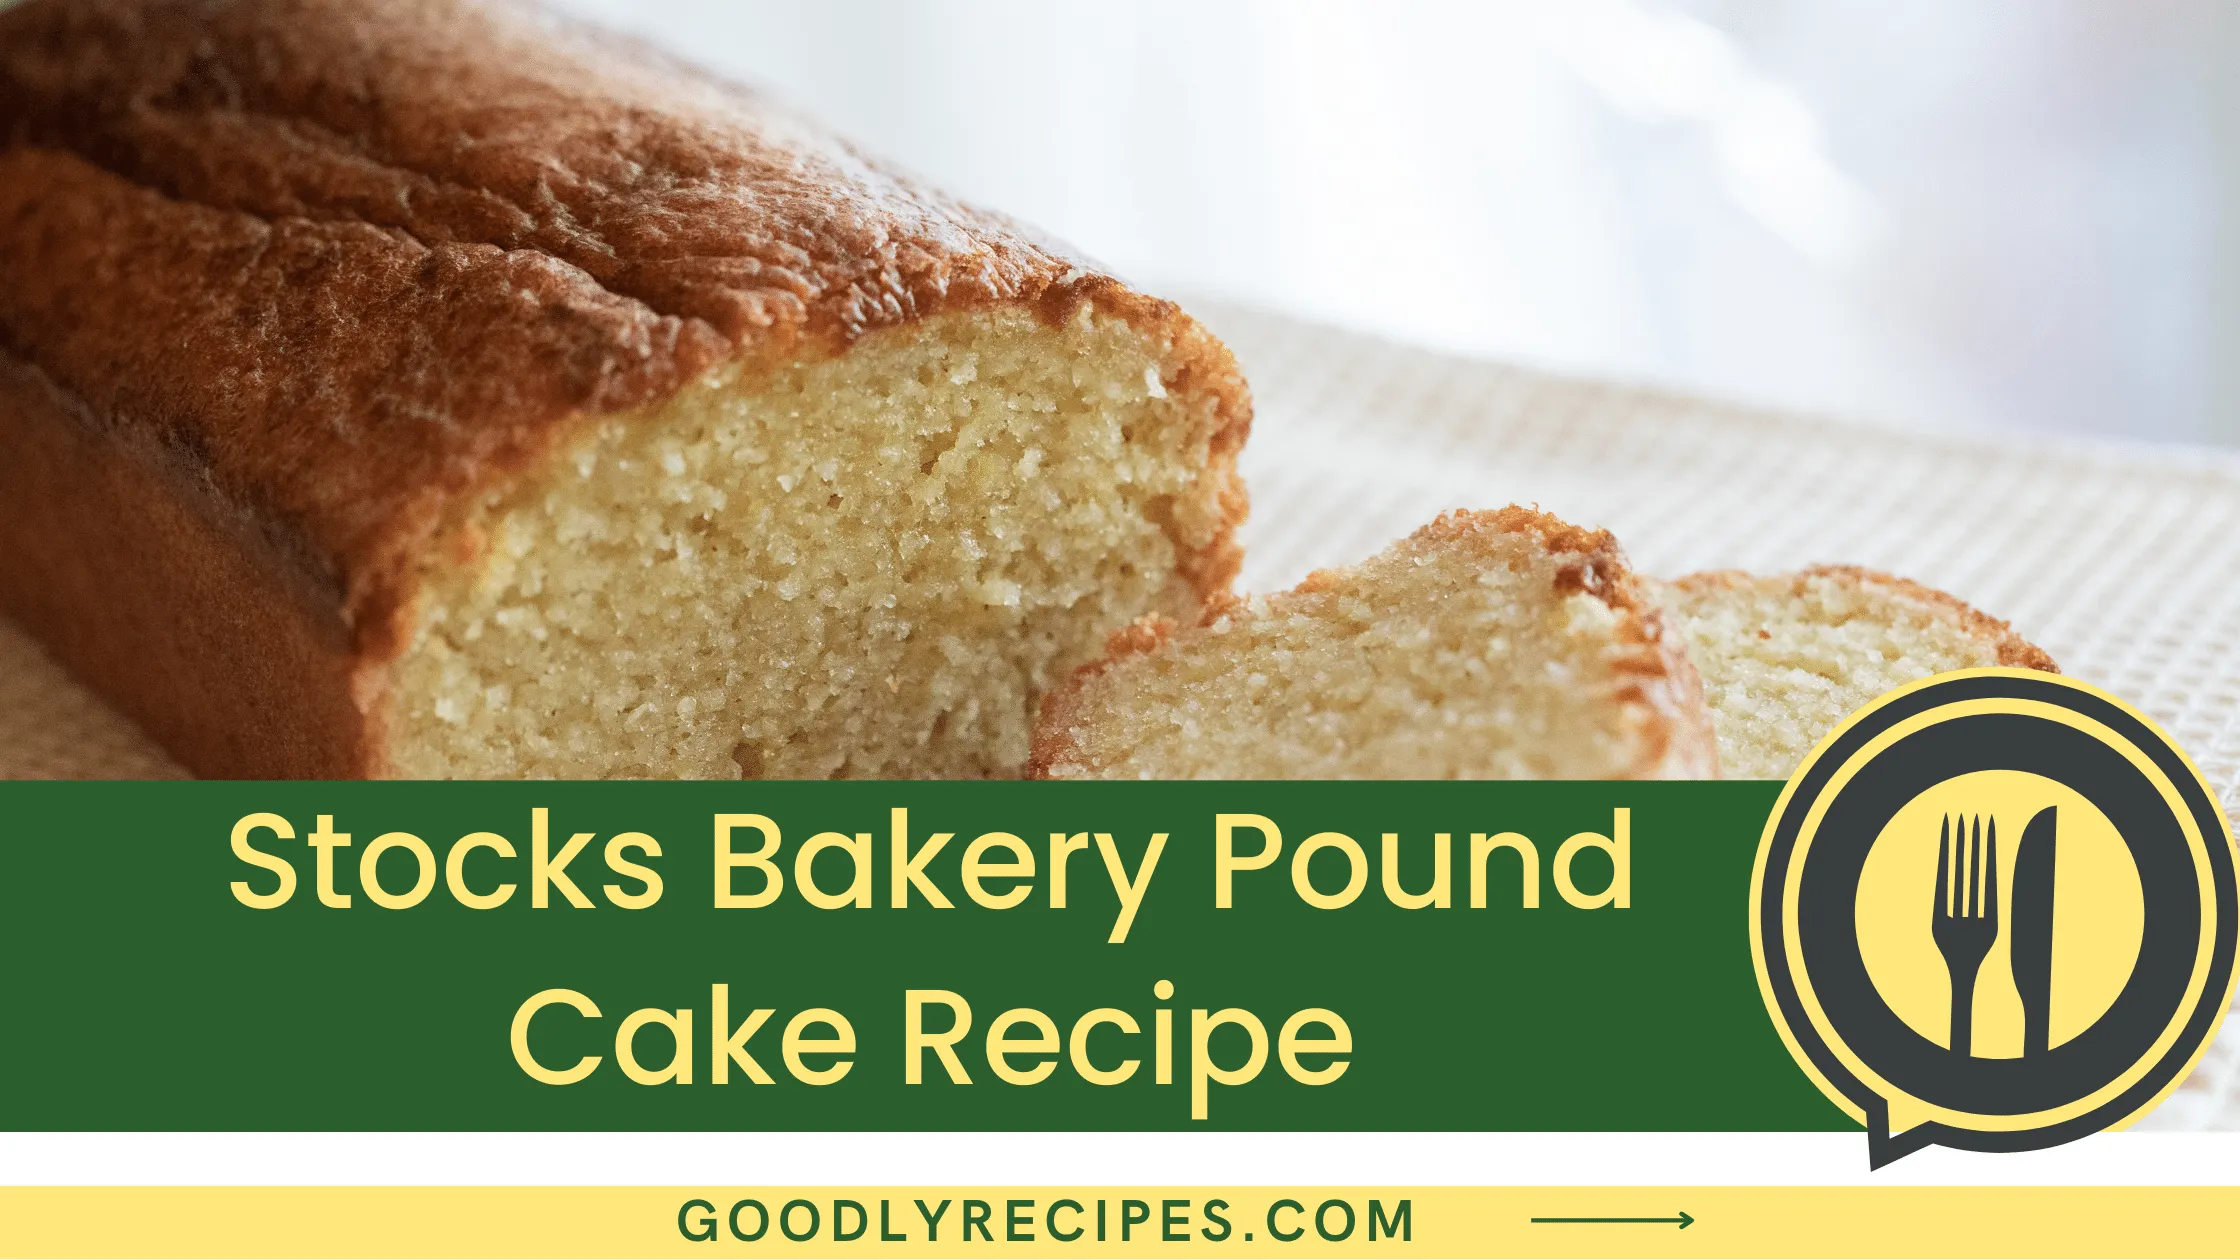 What is Stocks Bakery Pound cake?